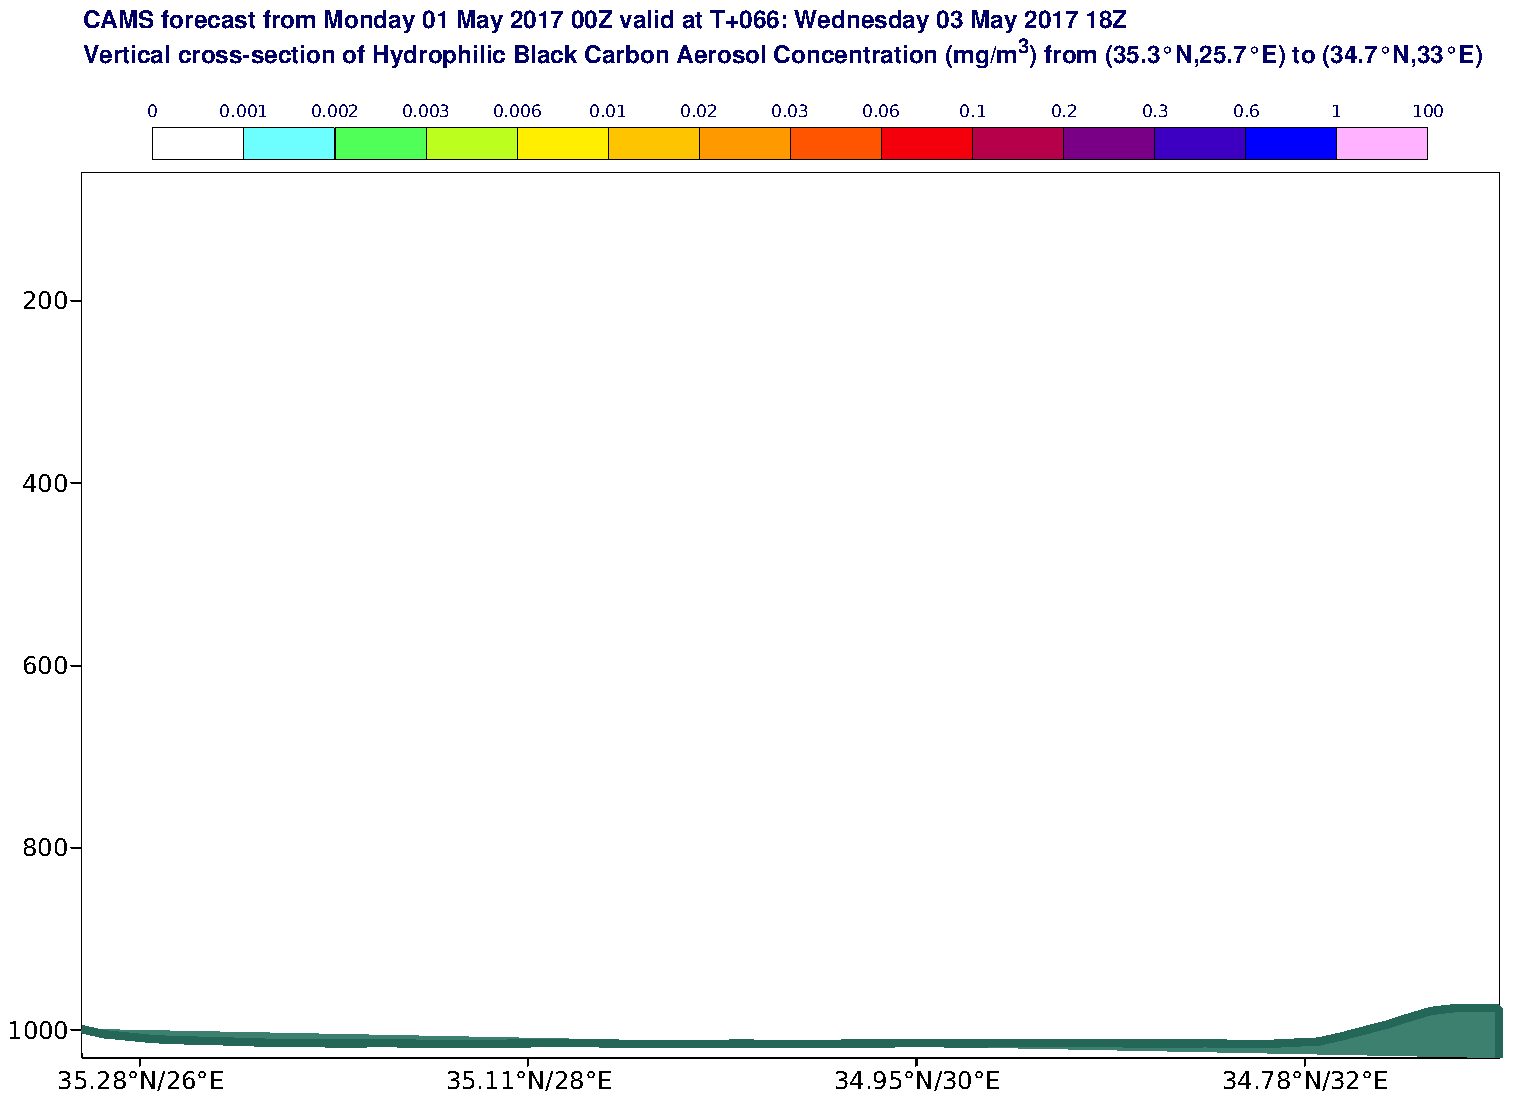 Vertical cross-section of Hydrophilic Black Carbon Aerosol Concentration (mg/m3) valid at T66 - 2017-05-03 18:00